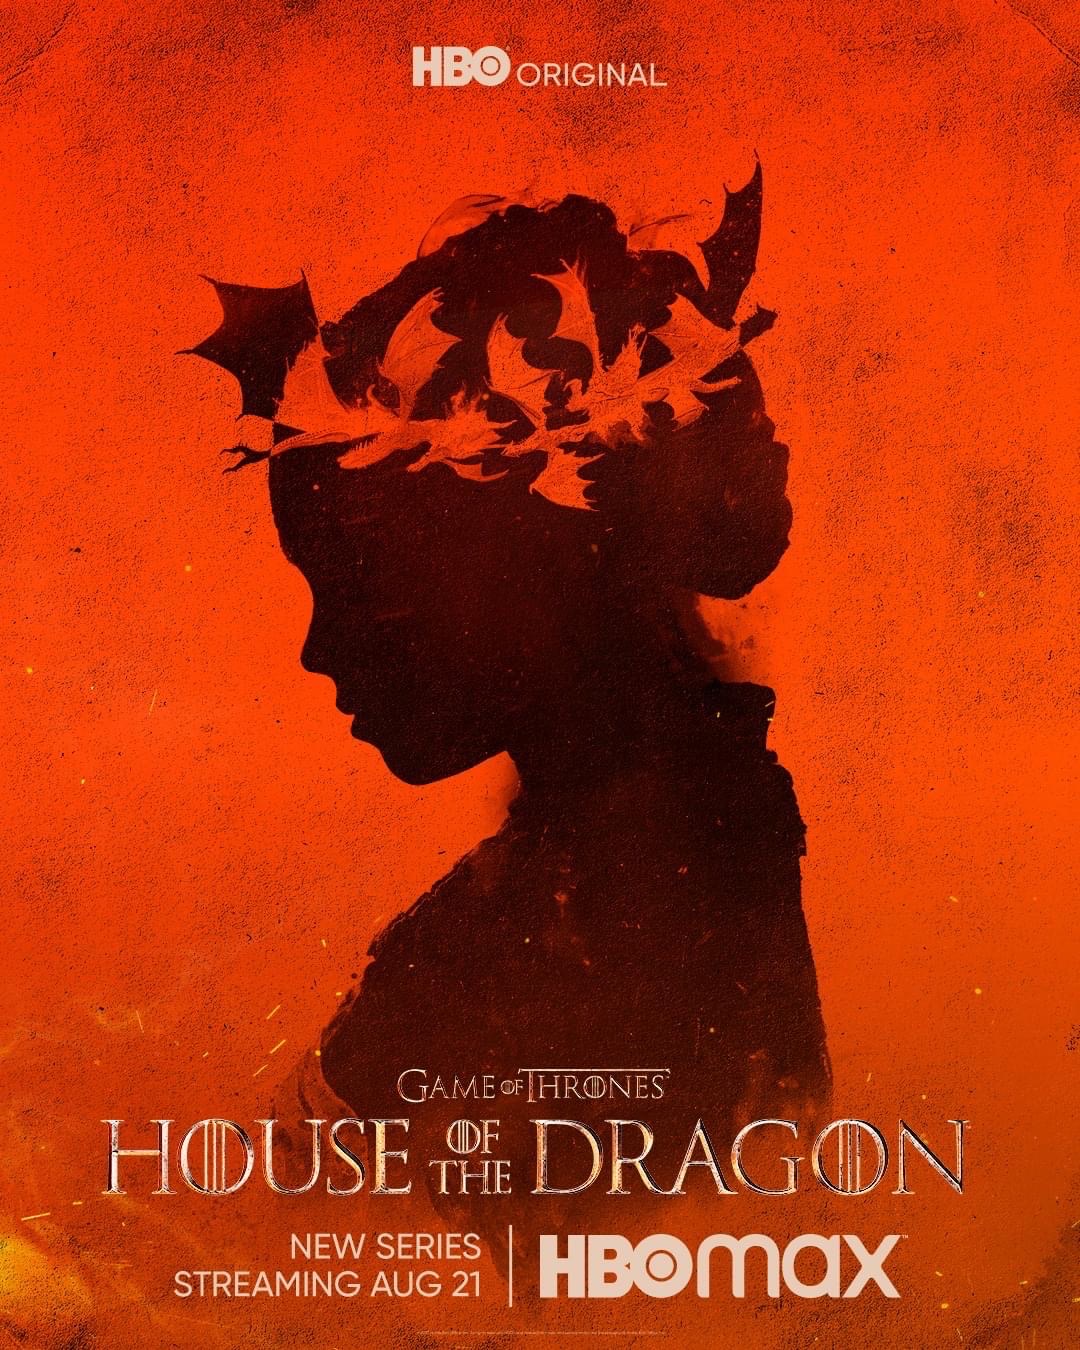 House of the Dragon SDCC 2022: A Preview Of Things To Come